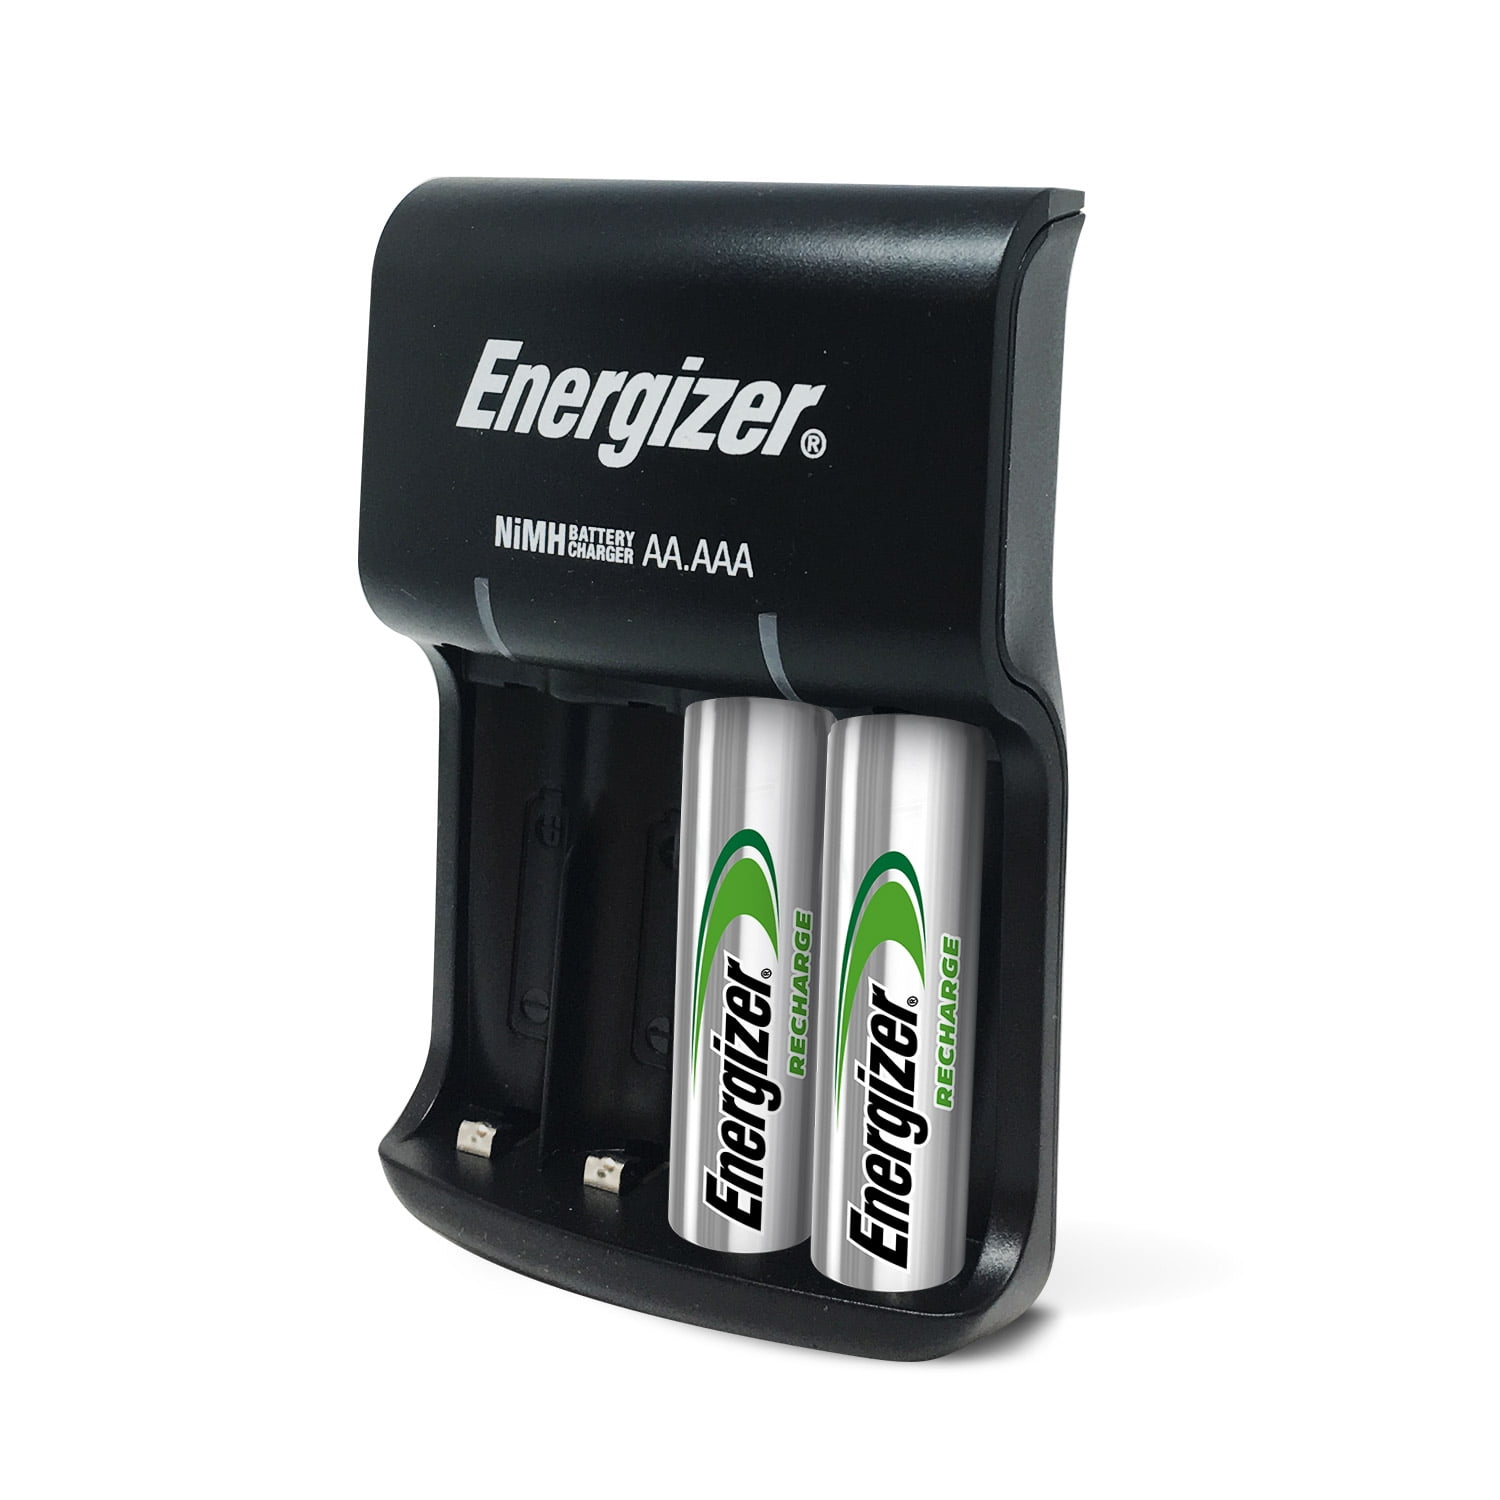 Energizer Battery Charger, AAA and Rechargeable AA Batteries